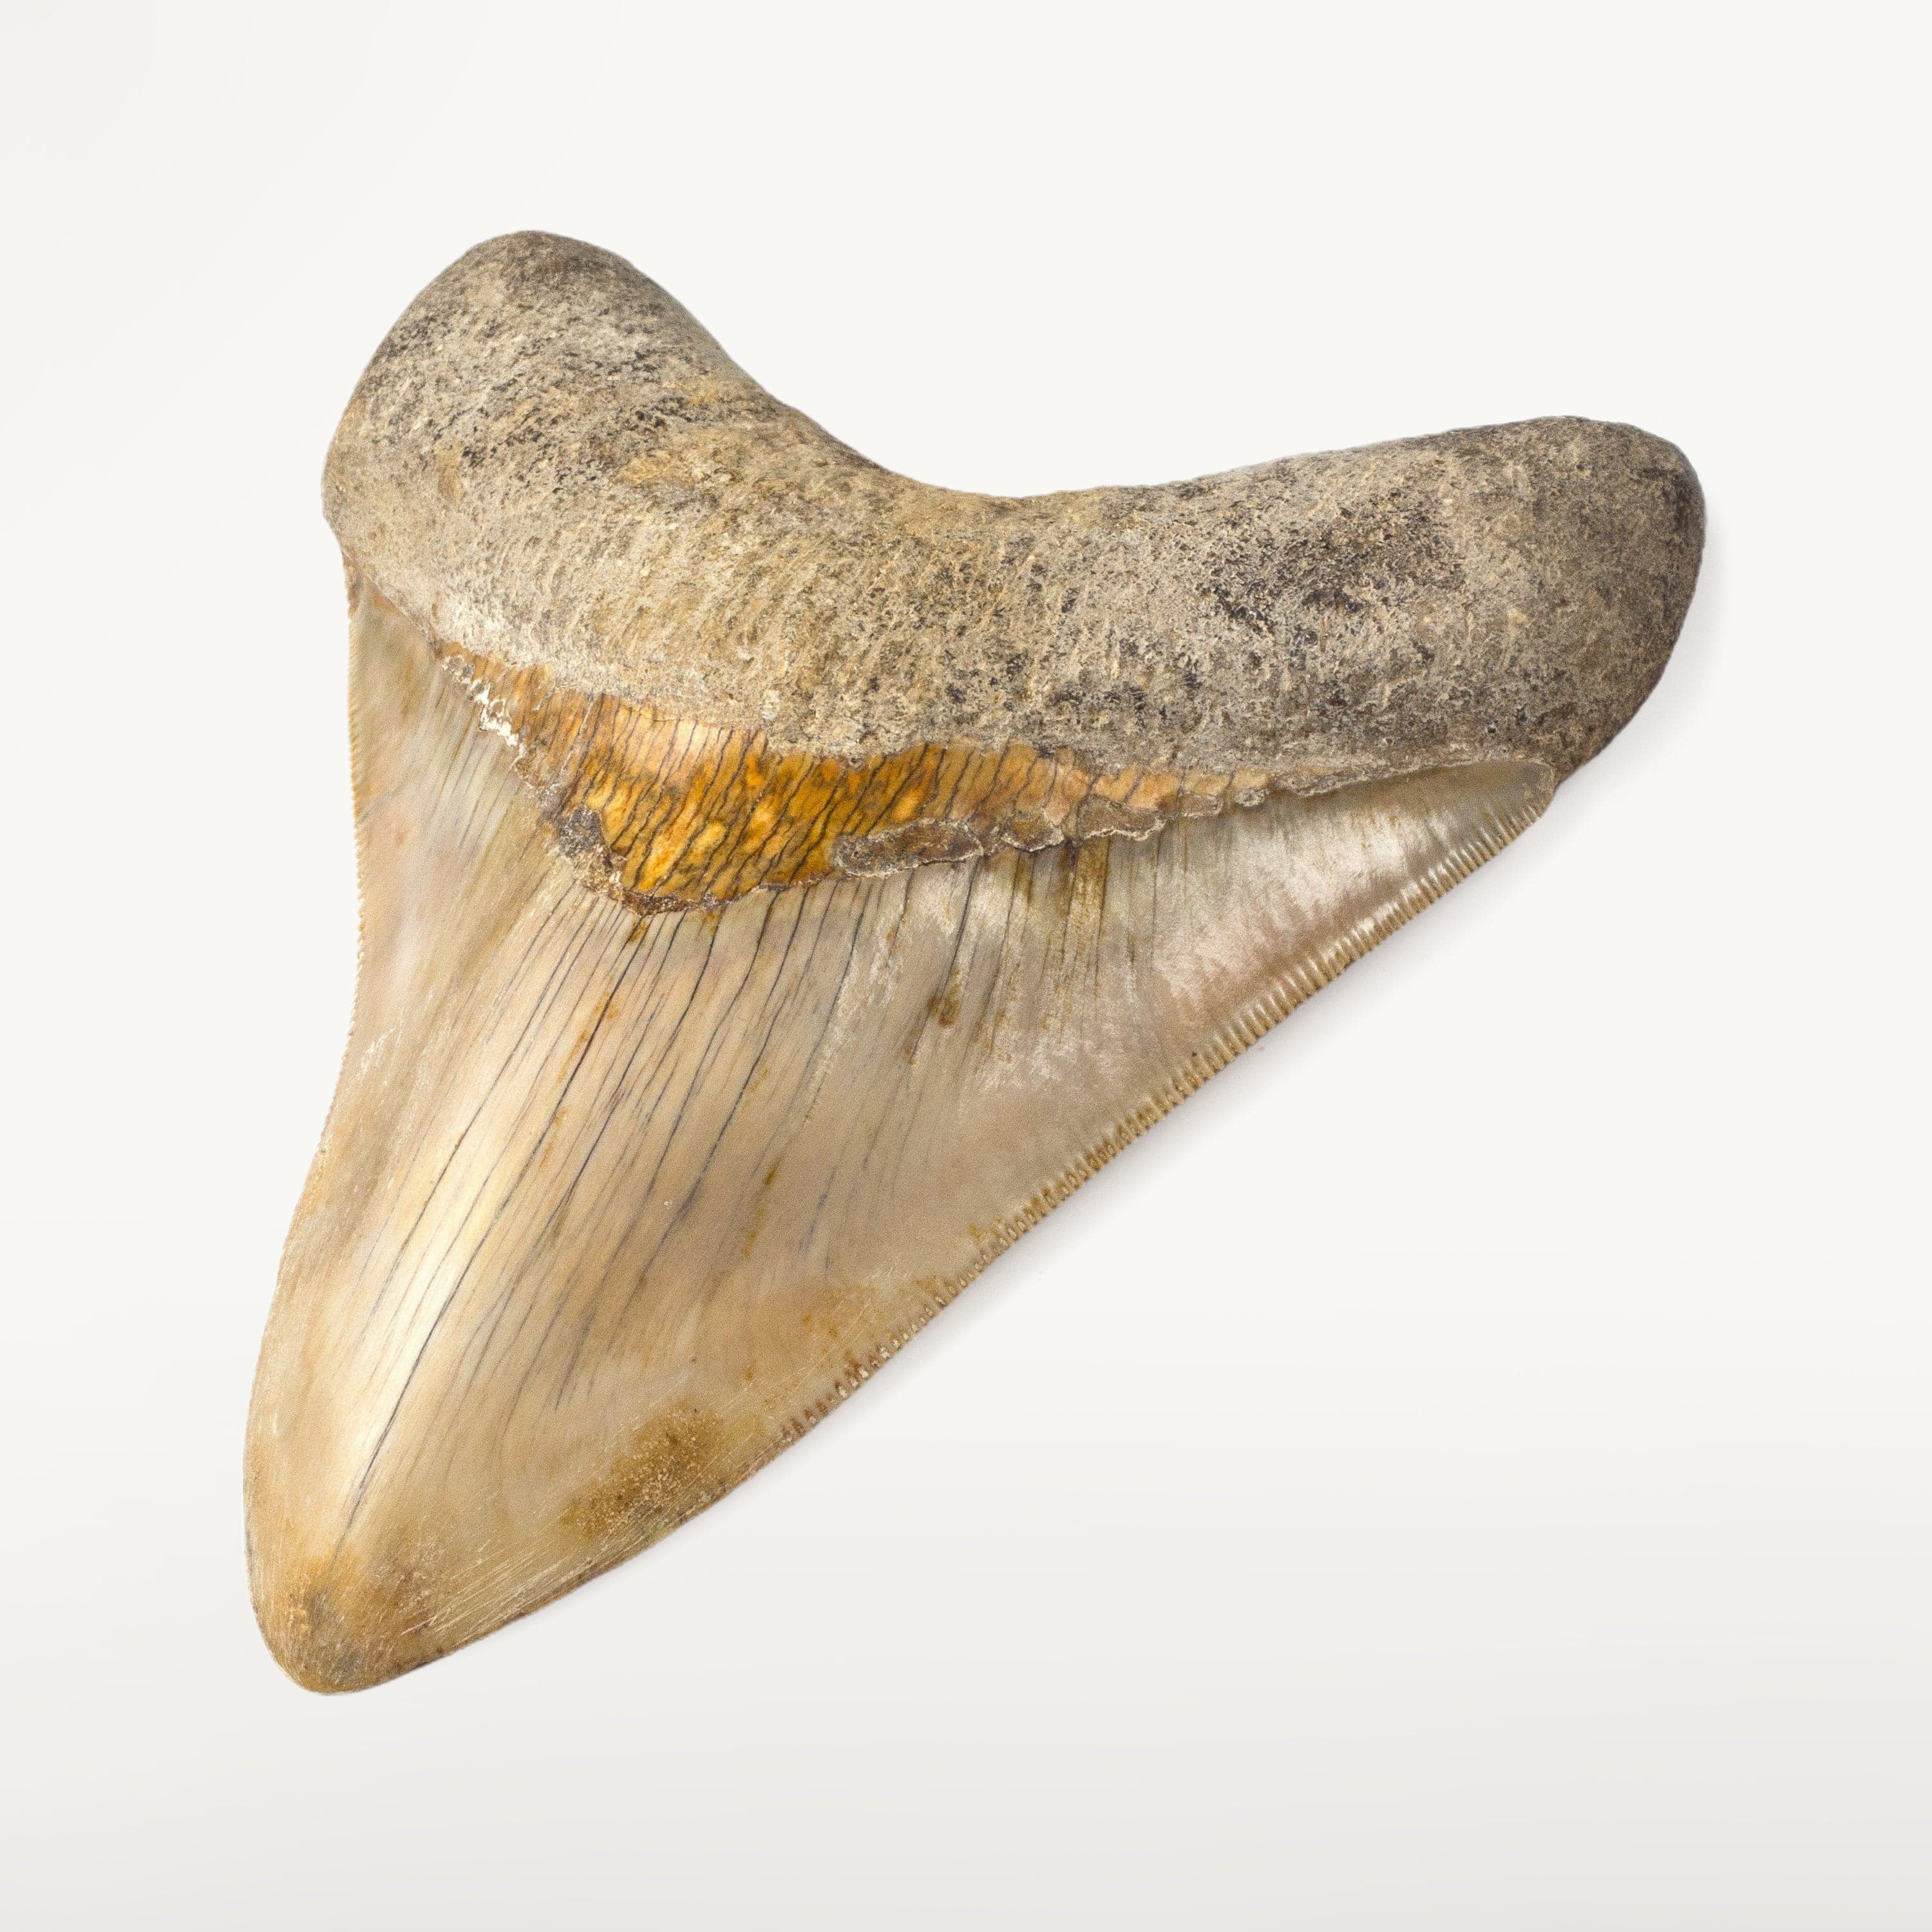 Kalifano Megalodon Teeth Natural Megalodon Tooth from Indonesia - 4.8" ST6000.001